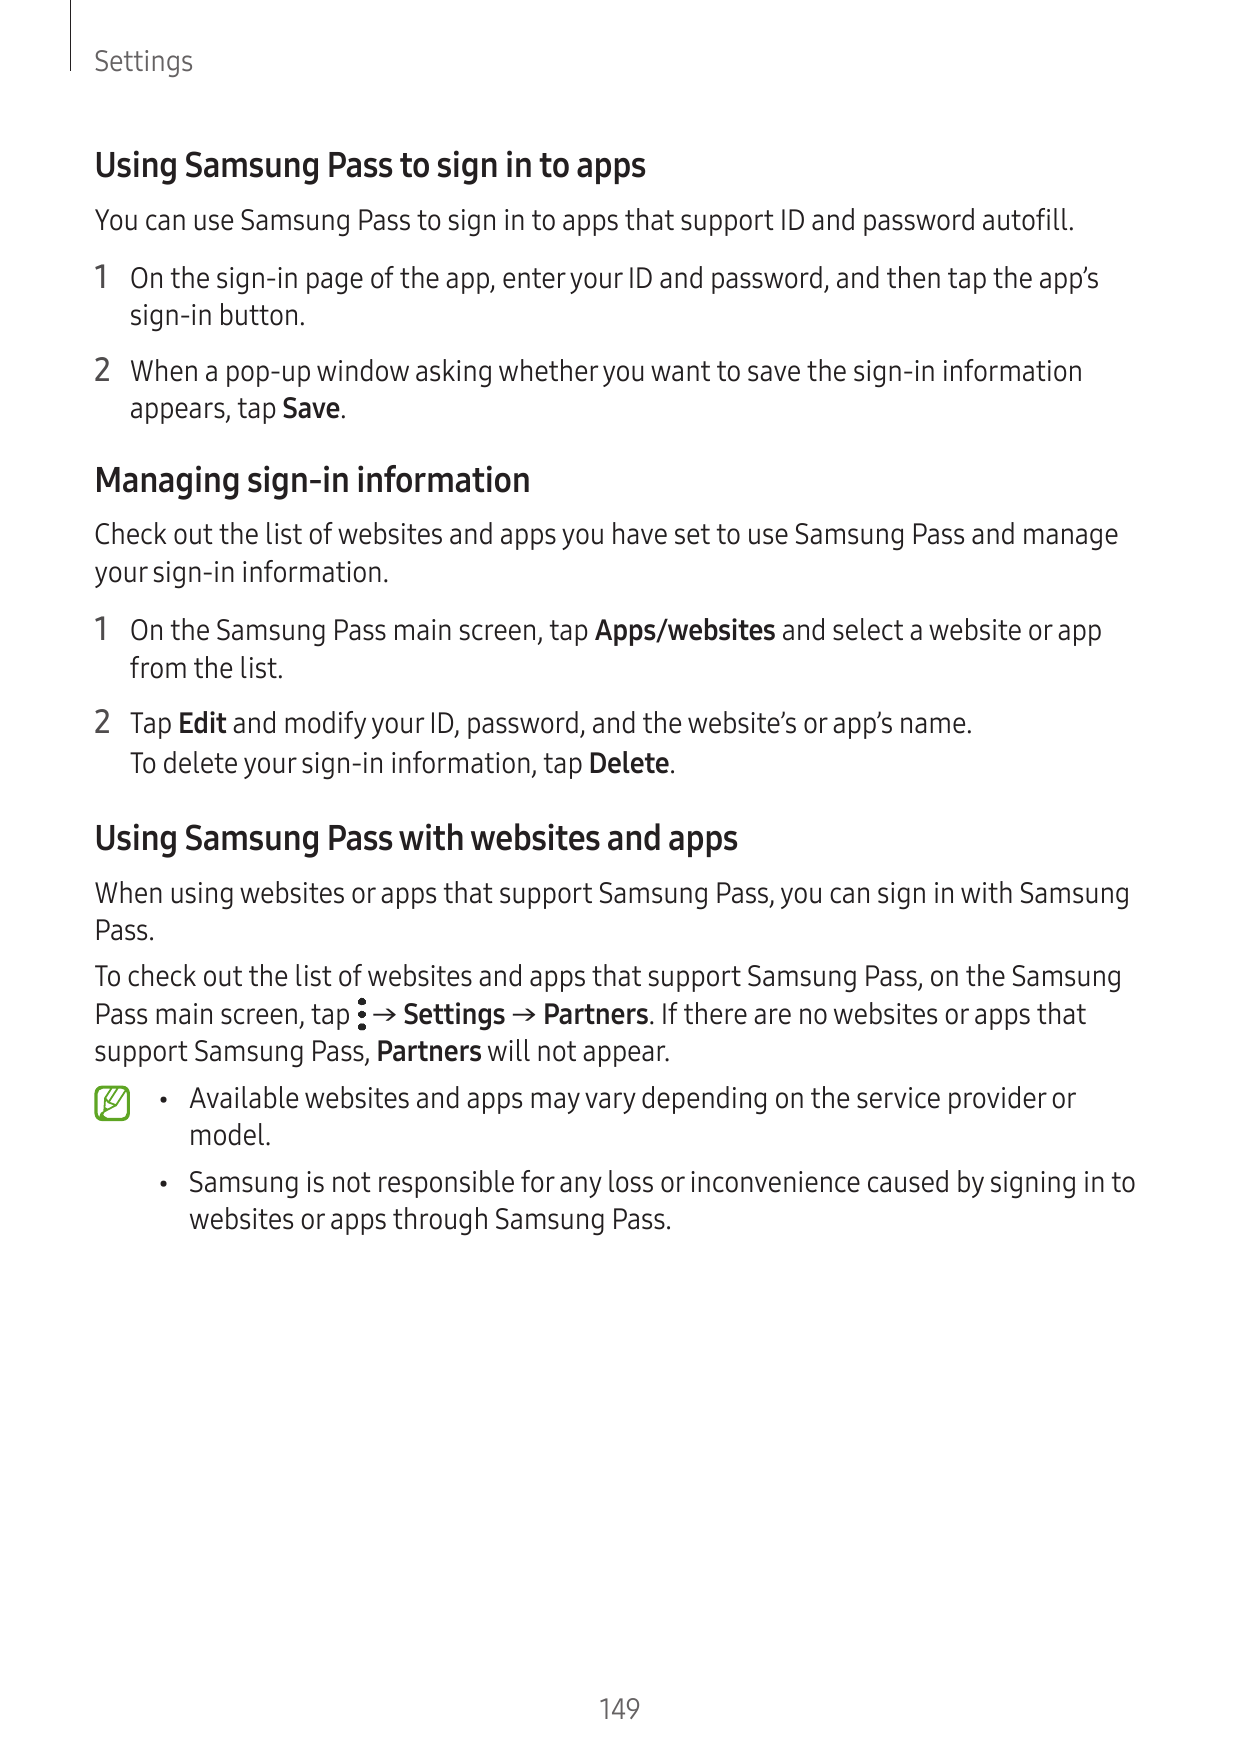 SettingsUsing Samsung Pass to sign in to appsYou can use Samsung Pass to sign in to apps that support ID and password autofill.1